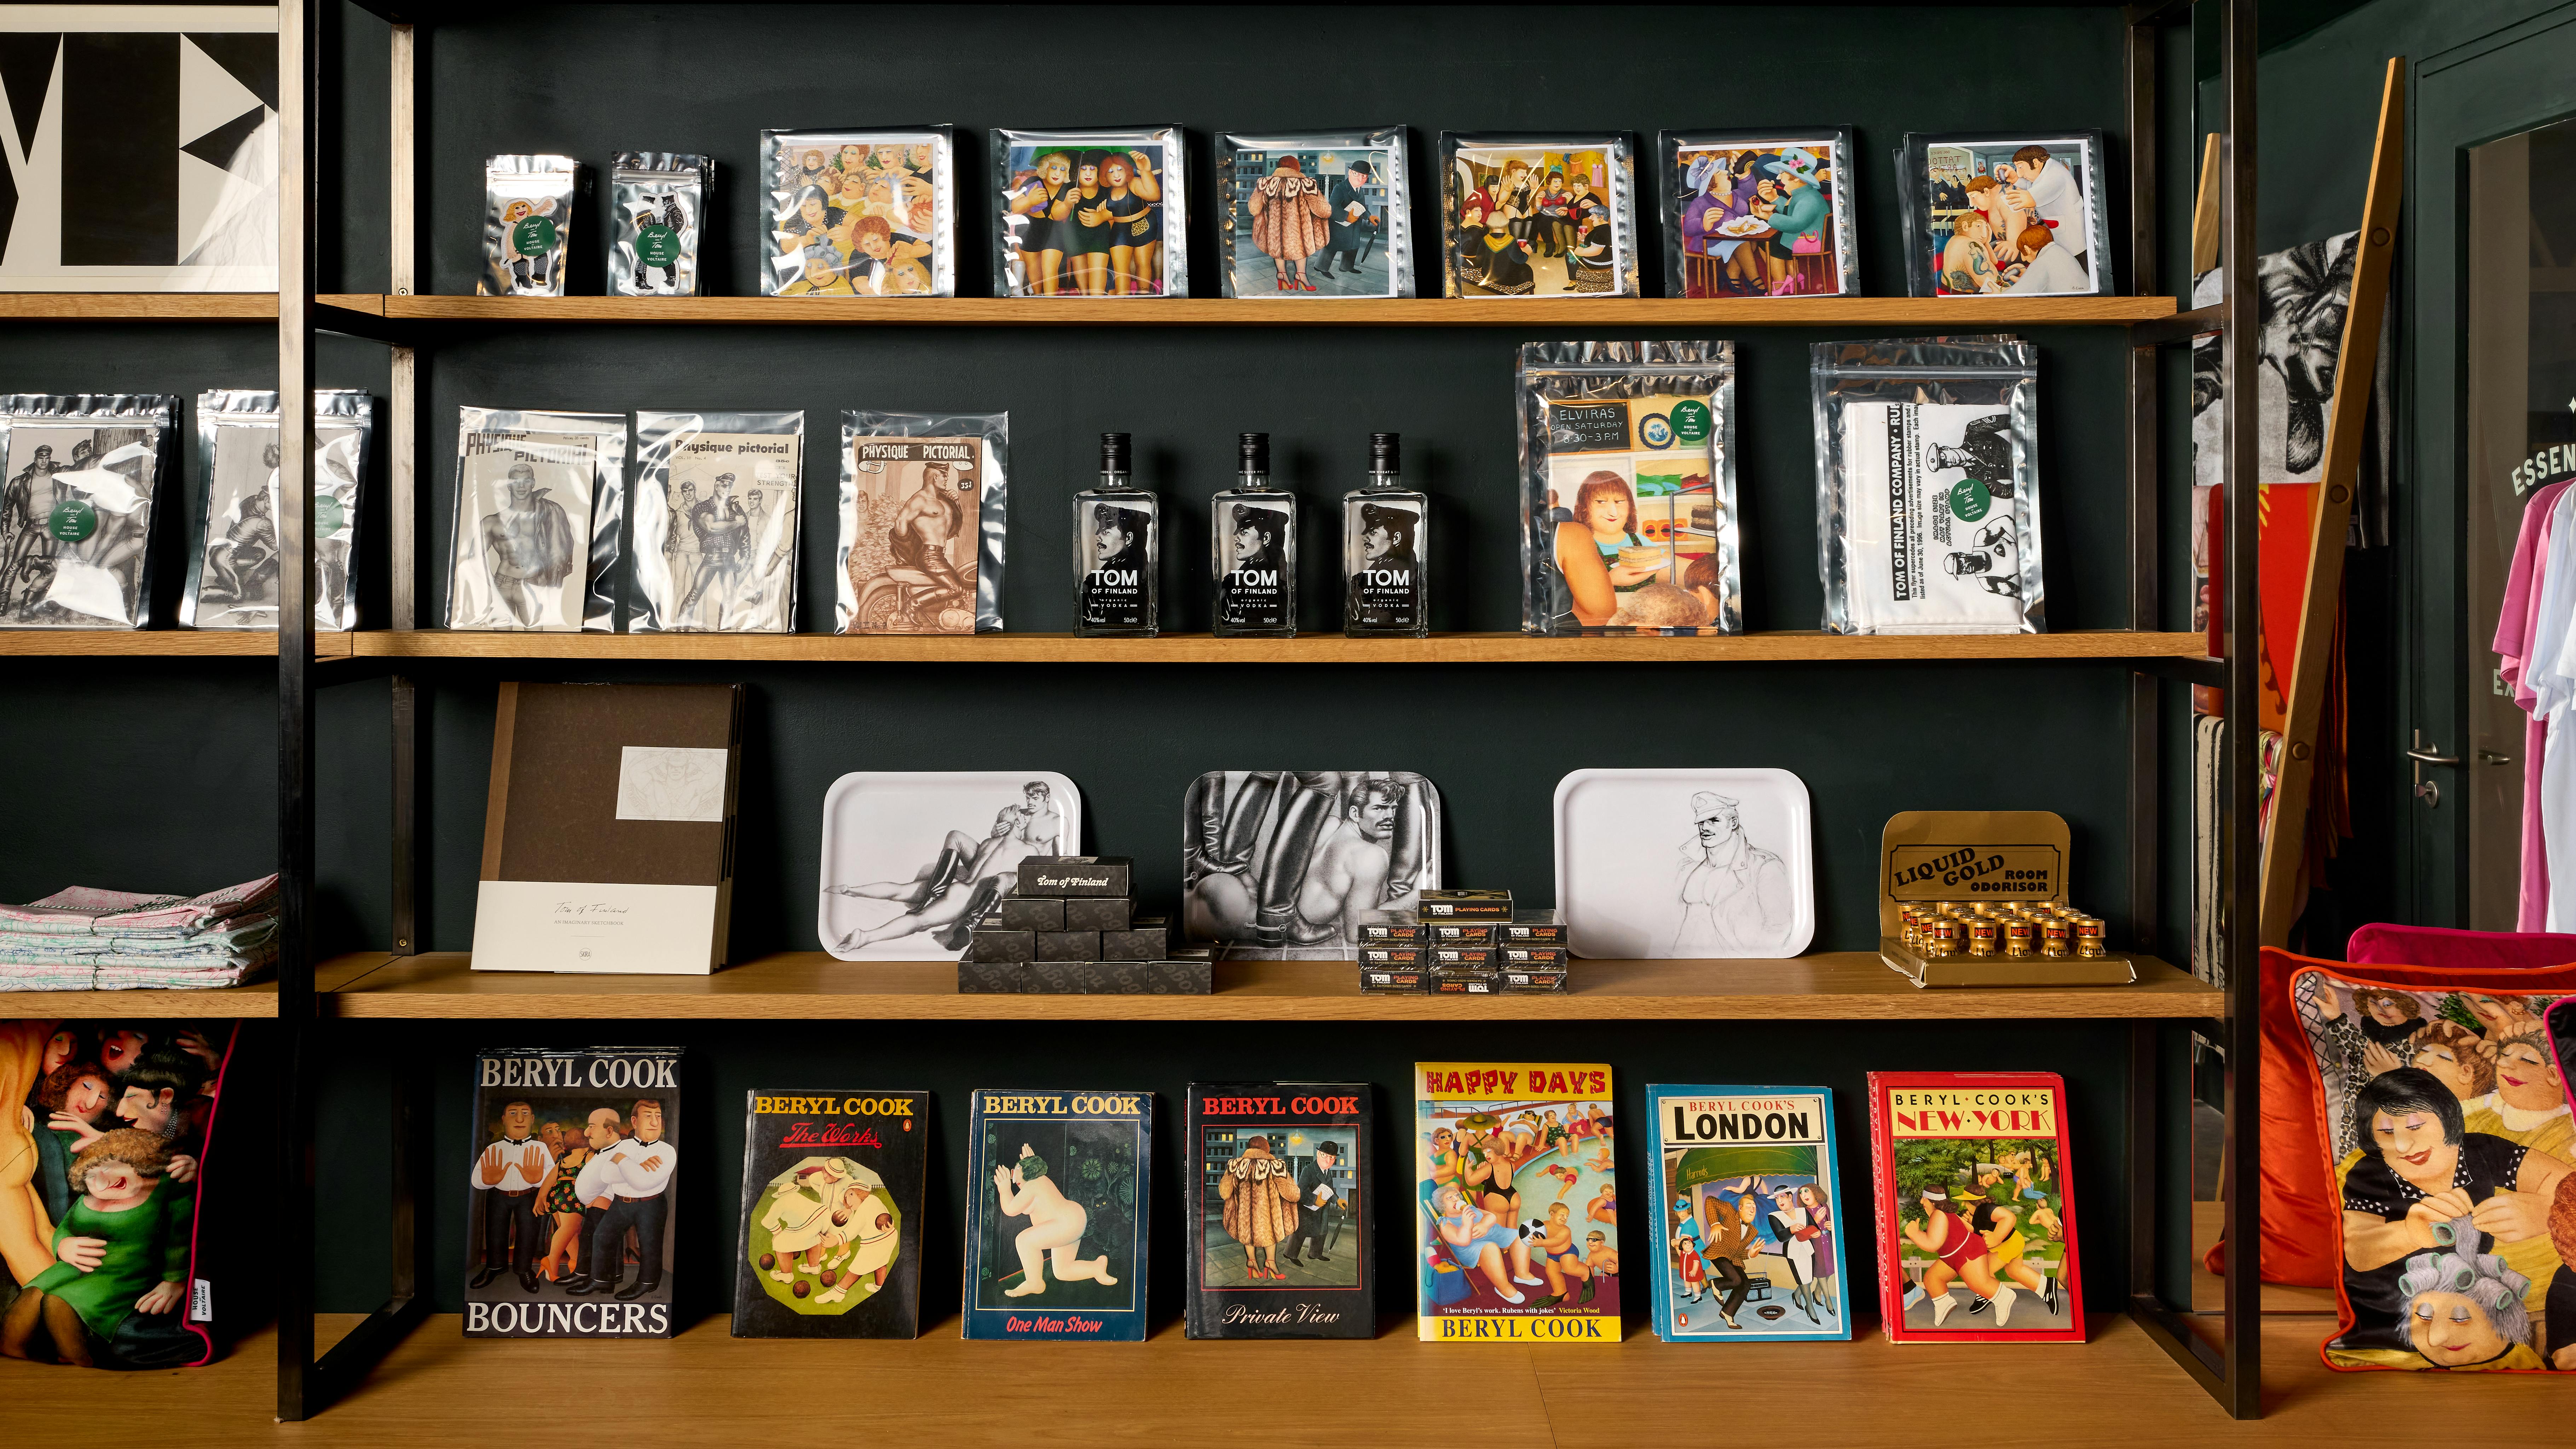 Shelves stacked with books, tea towels, greetings cards and other merchandise by Beryl Cook and Tom of Finland